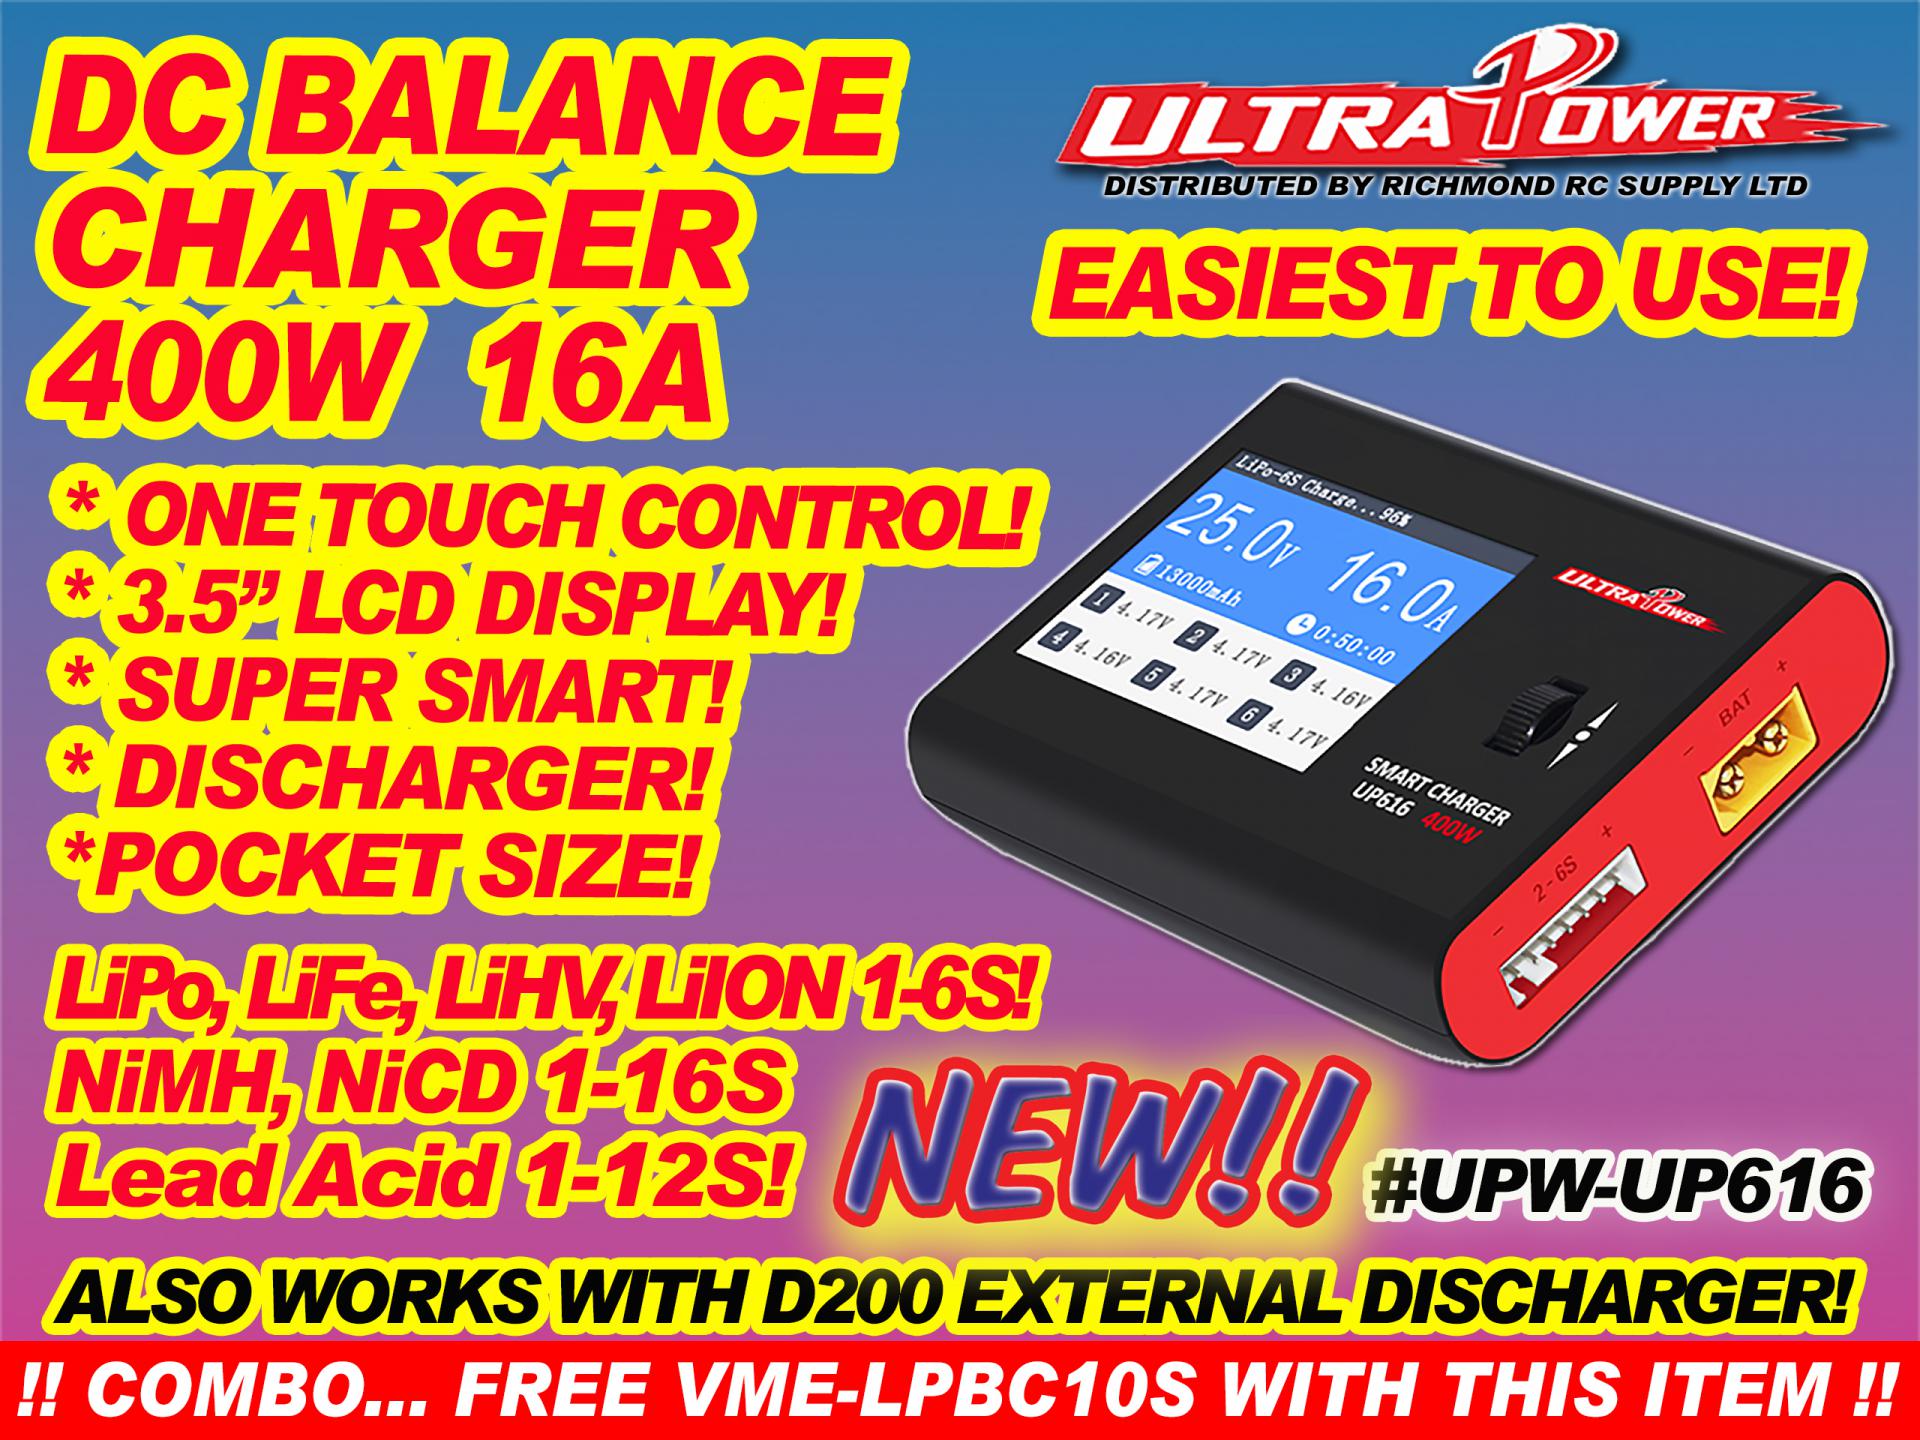 ULTRA POWER CHARGER - DC, 400W 16A w/TFT SCREEN x1  [ 91105]